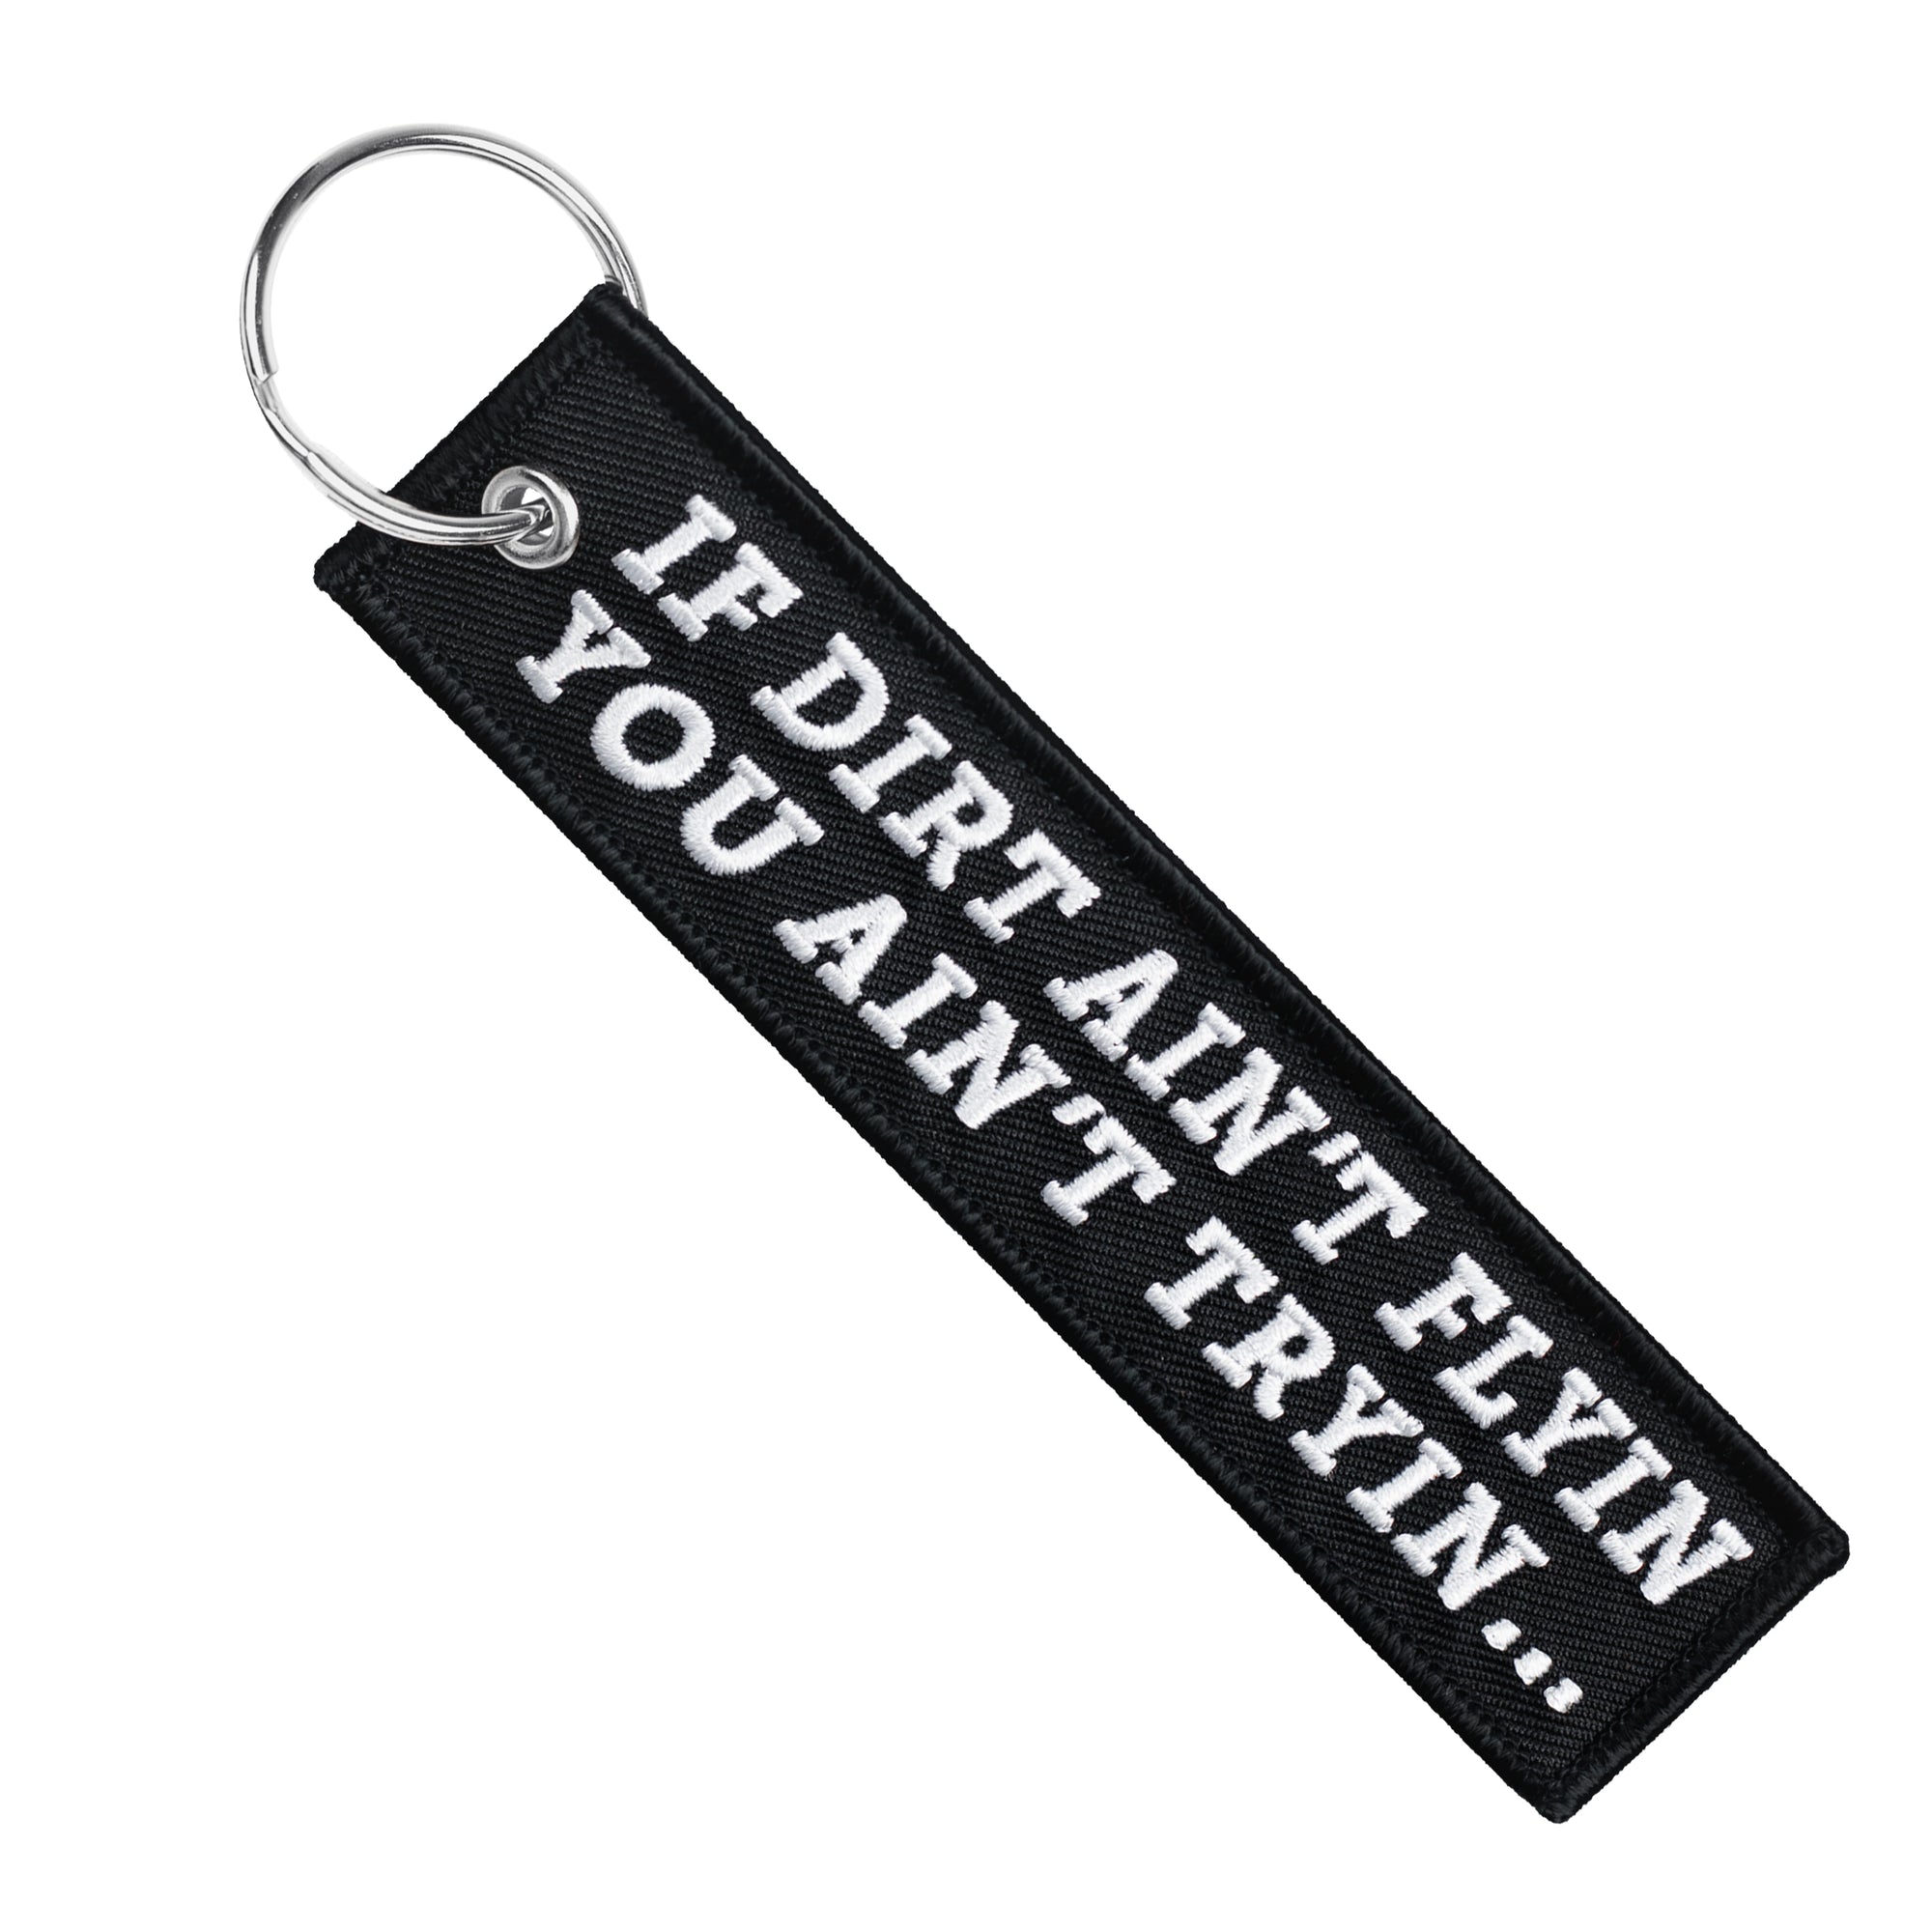 Drop a Gear and Disappear - Black Motorcycle Keychain - Moto Loot